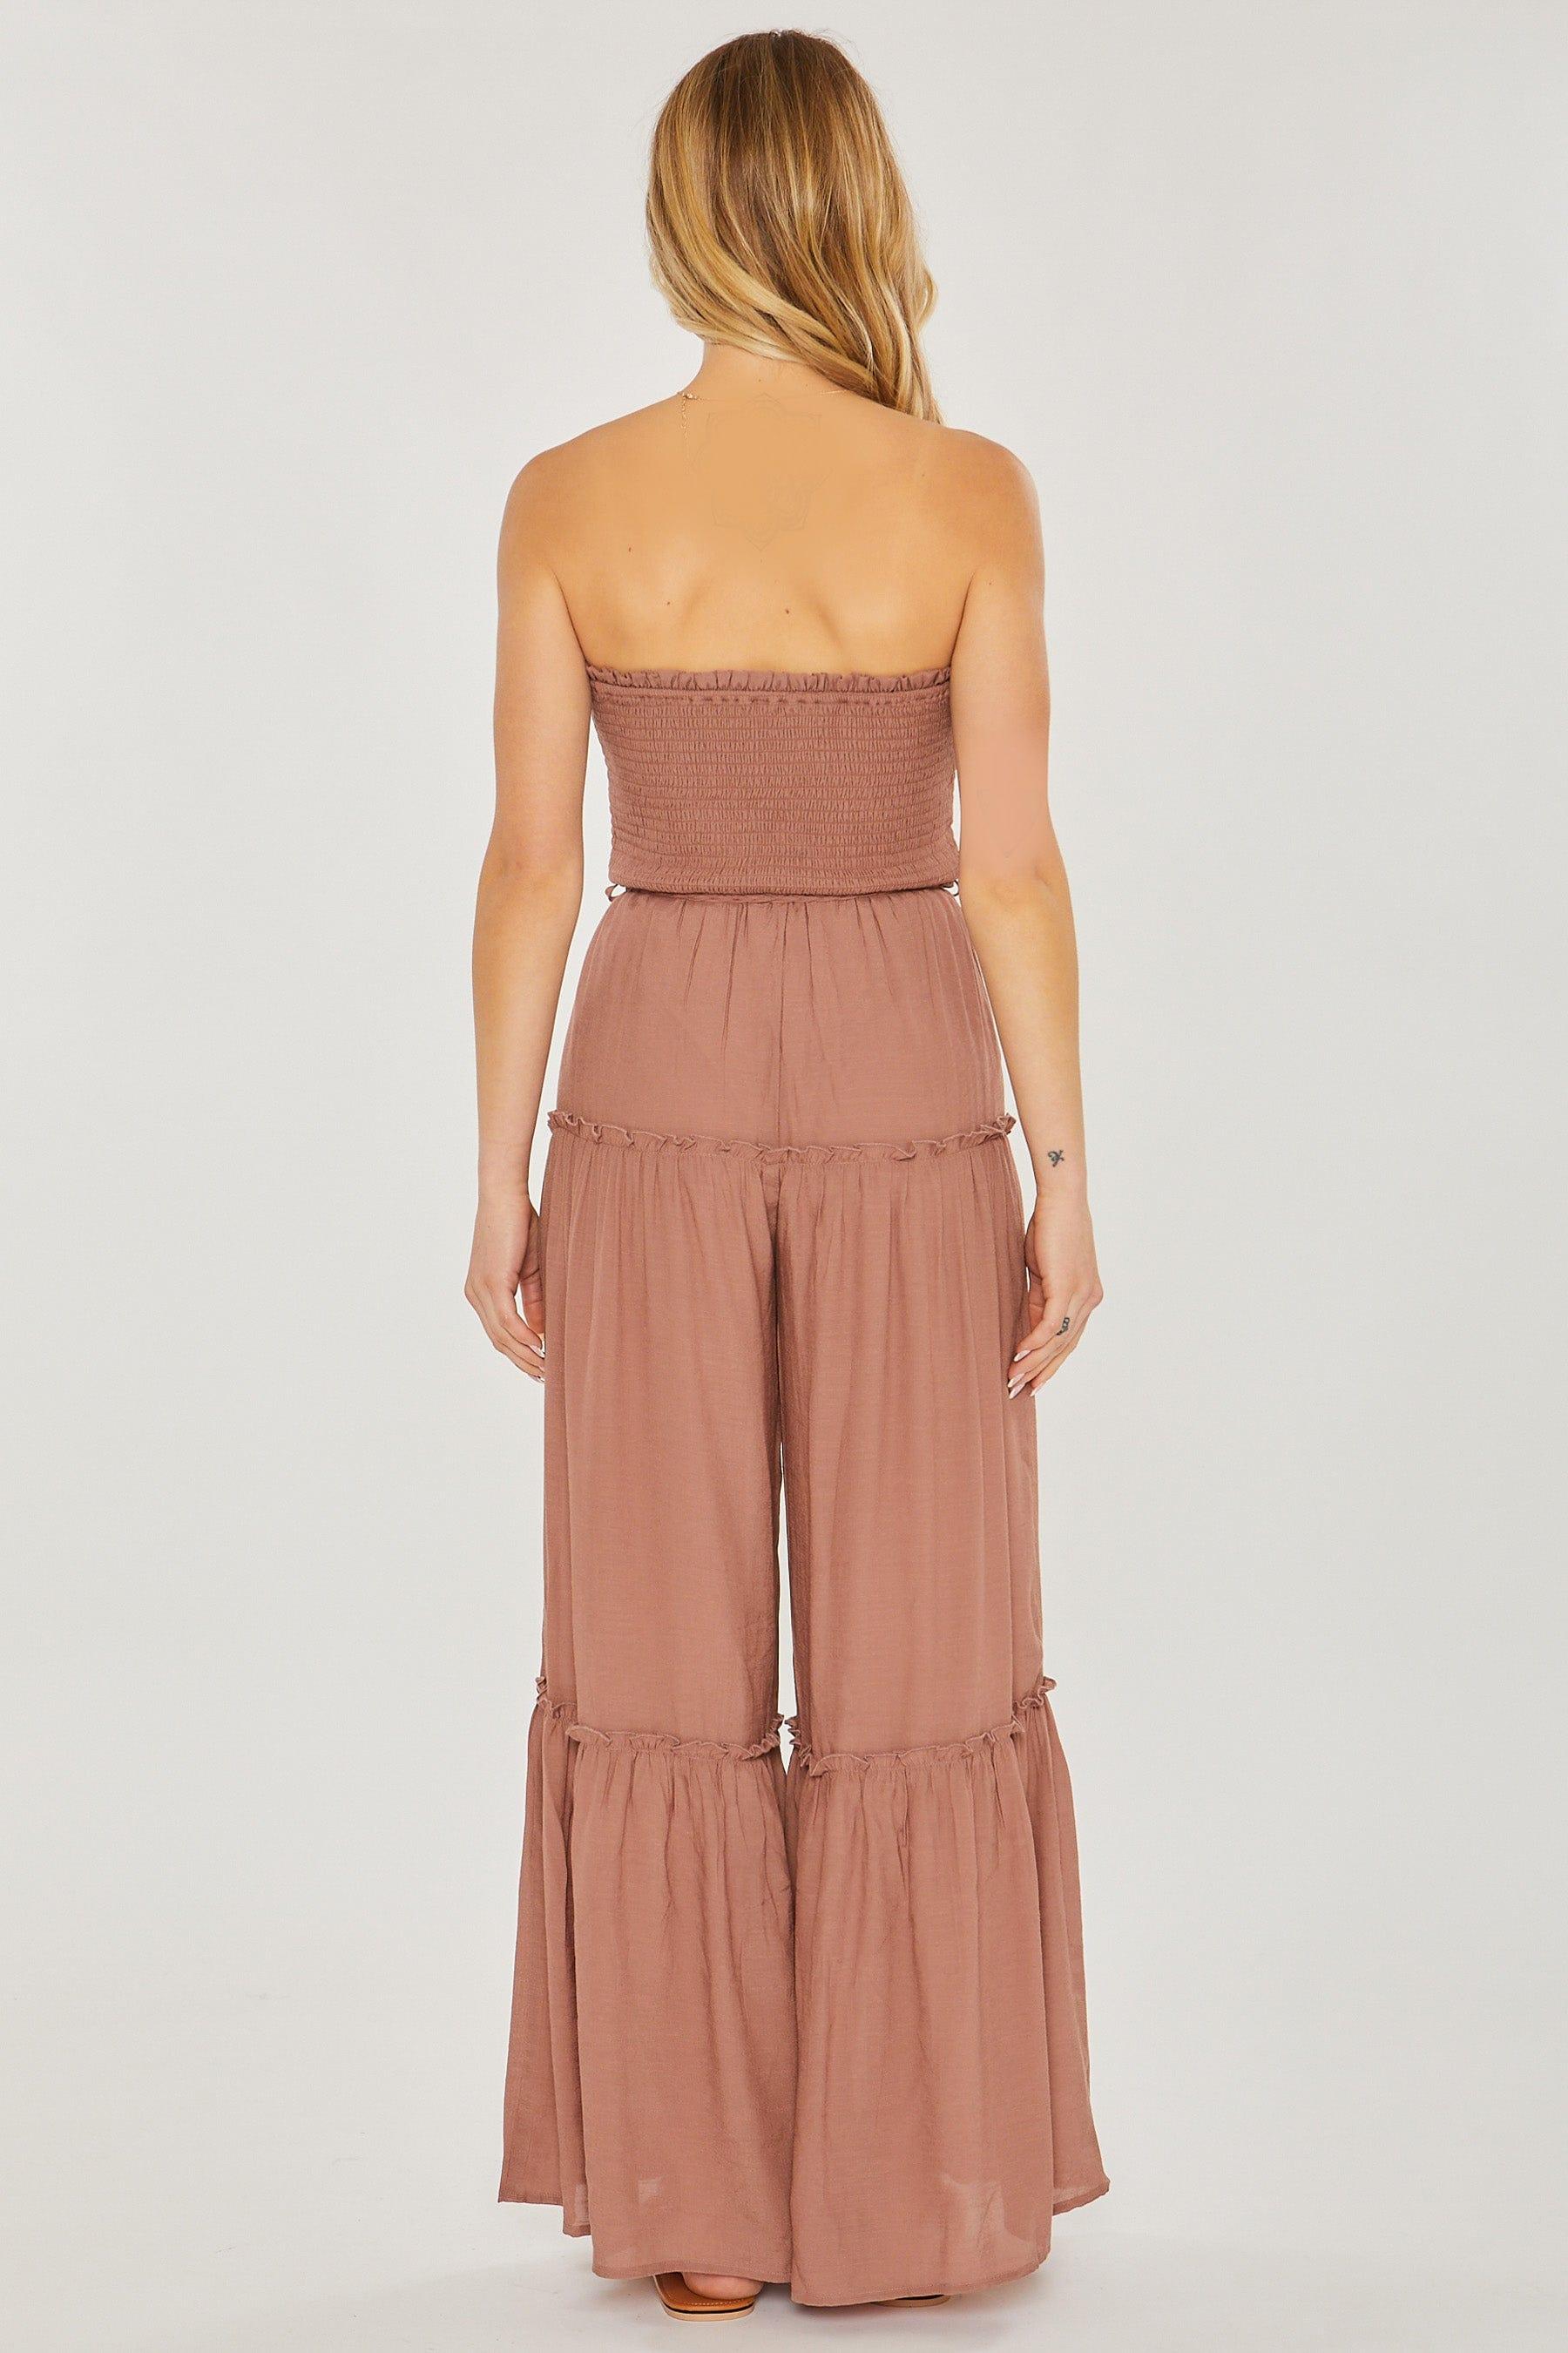 SAVLUXE Jumpsuits & Rompers Clay Woven Solid Sleeveless Smocked Ruffle Jumpsuit